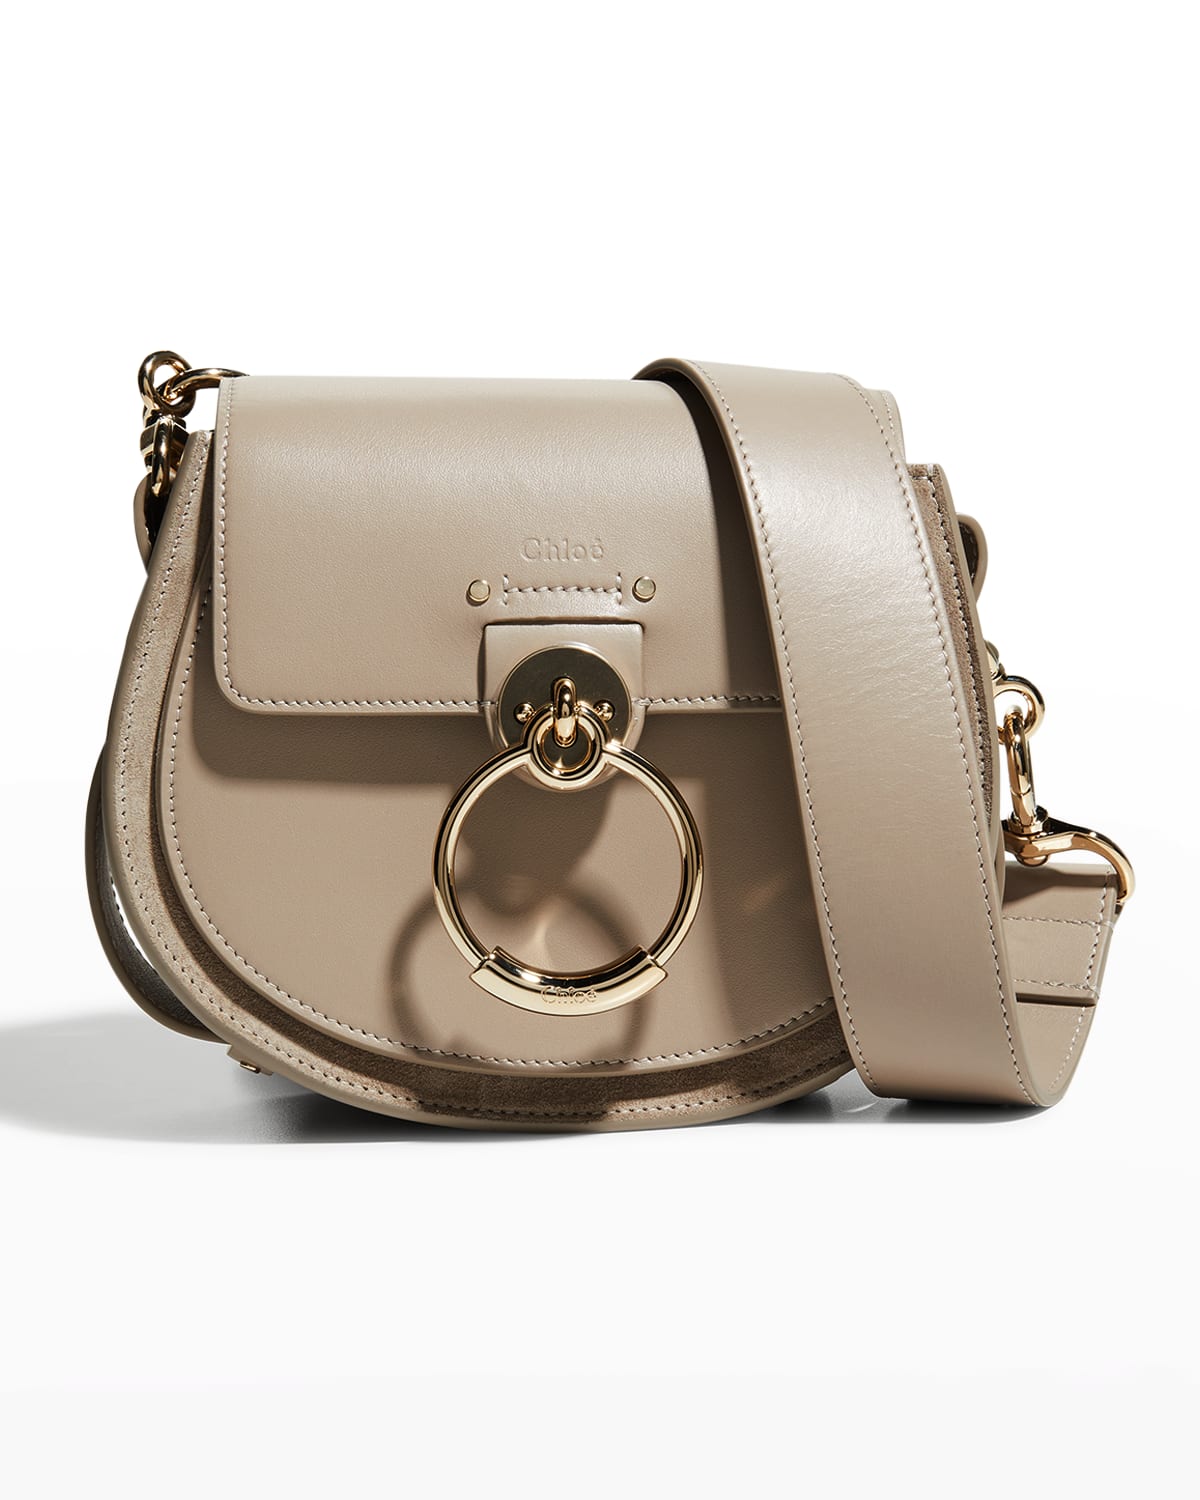 CHLOÉ TESS SMALL CROSSBODY BAG IN LEATHER